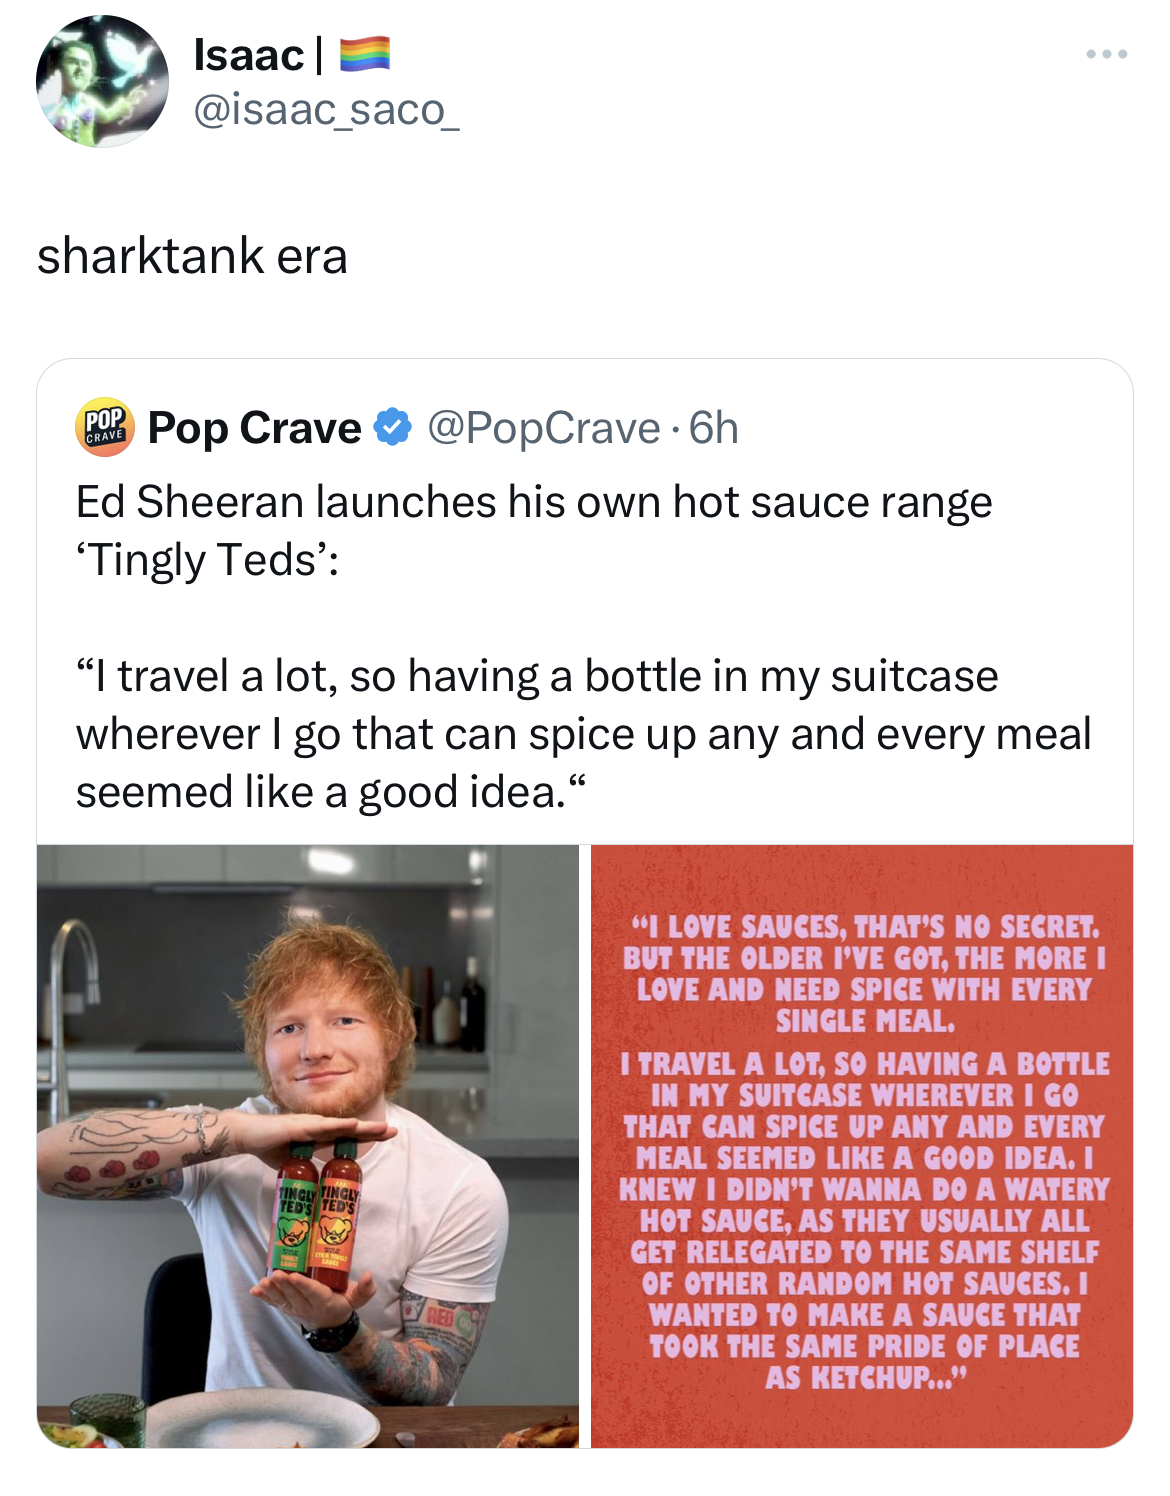 Tweets dunking on celebs - media - Isaac | sharktank era Pop Crave 6h Ed Sheeran launches his own hot sauce range 'Tingly Teds' "I travel a lot, so having a bottle in my suitcase wherever I go that can spice up any and every meal seemed a good idea." "I L